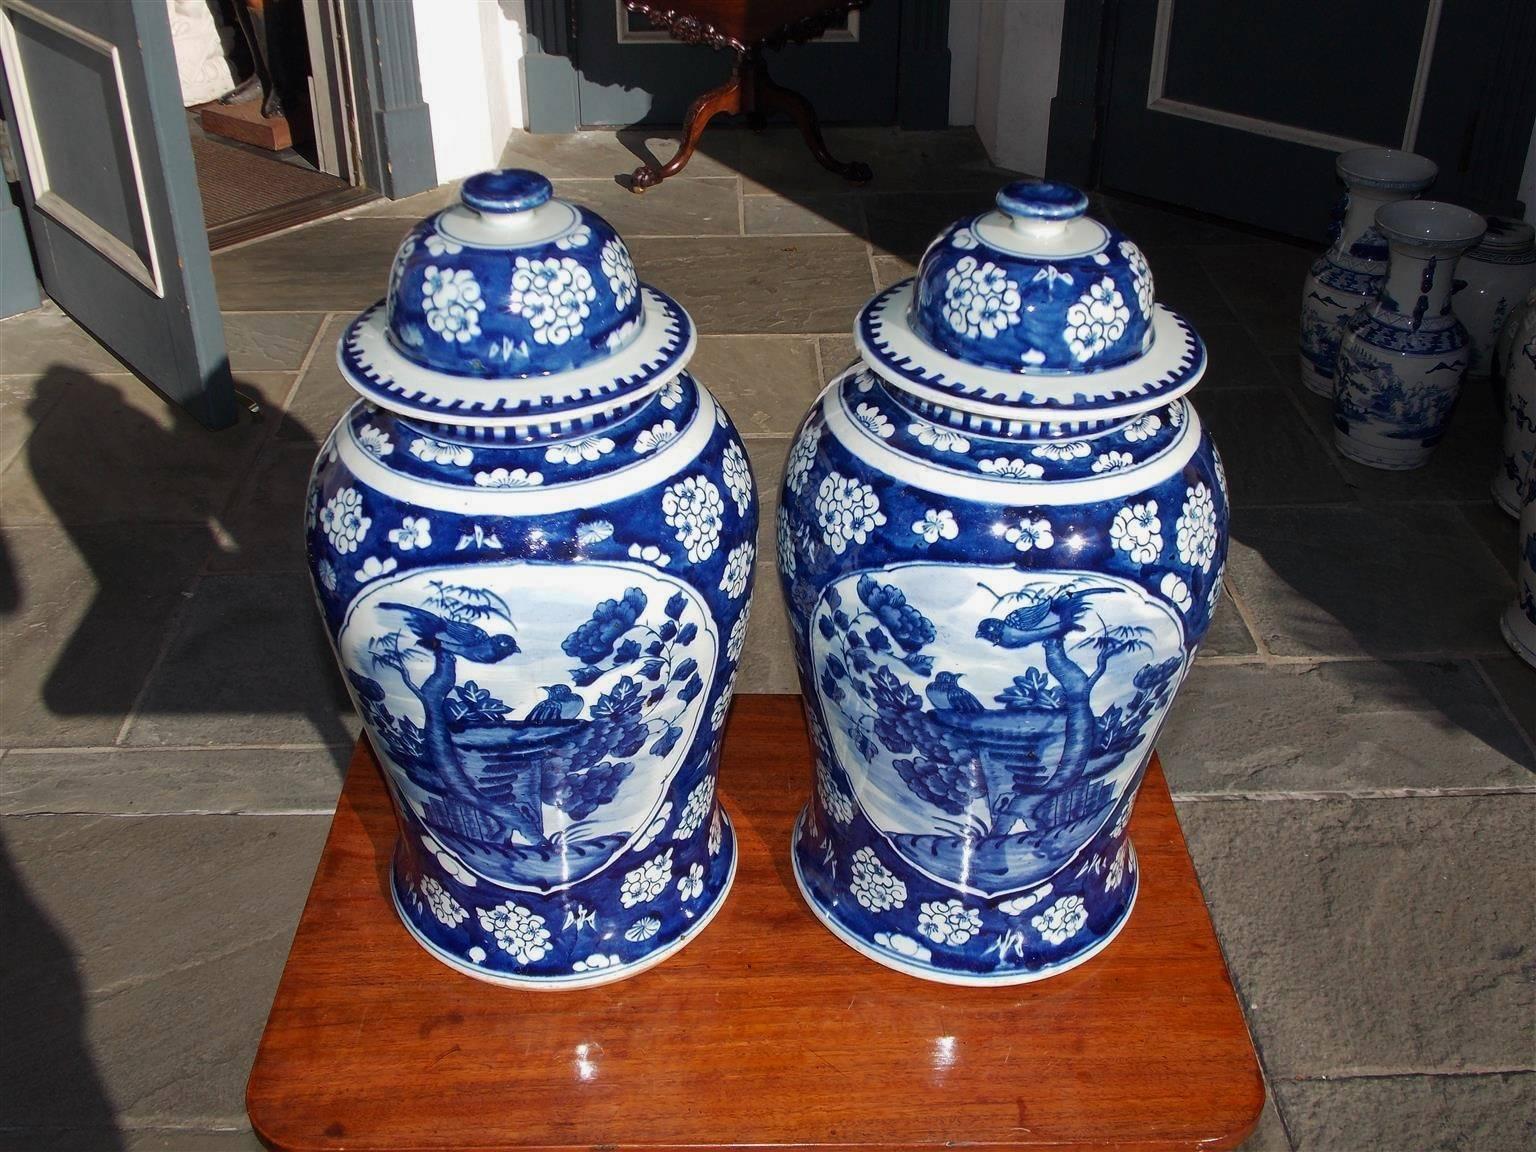 Pair of Chinese porcelain glazed blue and white temple jars with vibrantly hand-painted oval scenes of birds perched in trees, exterior painted borders, and decorative flowers. Lids are removable and jars were used to store perishable goods, 20th